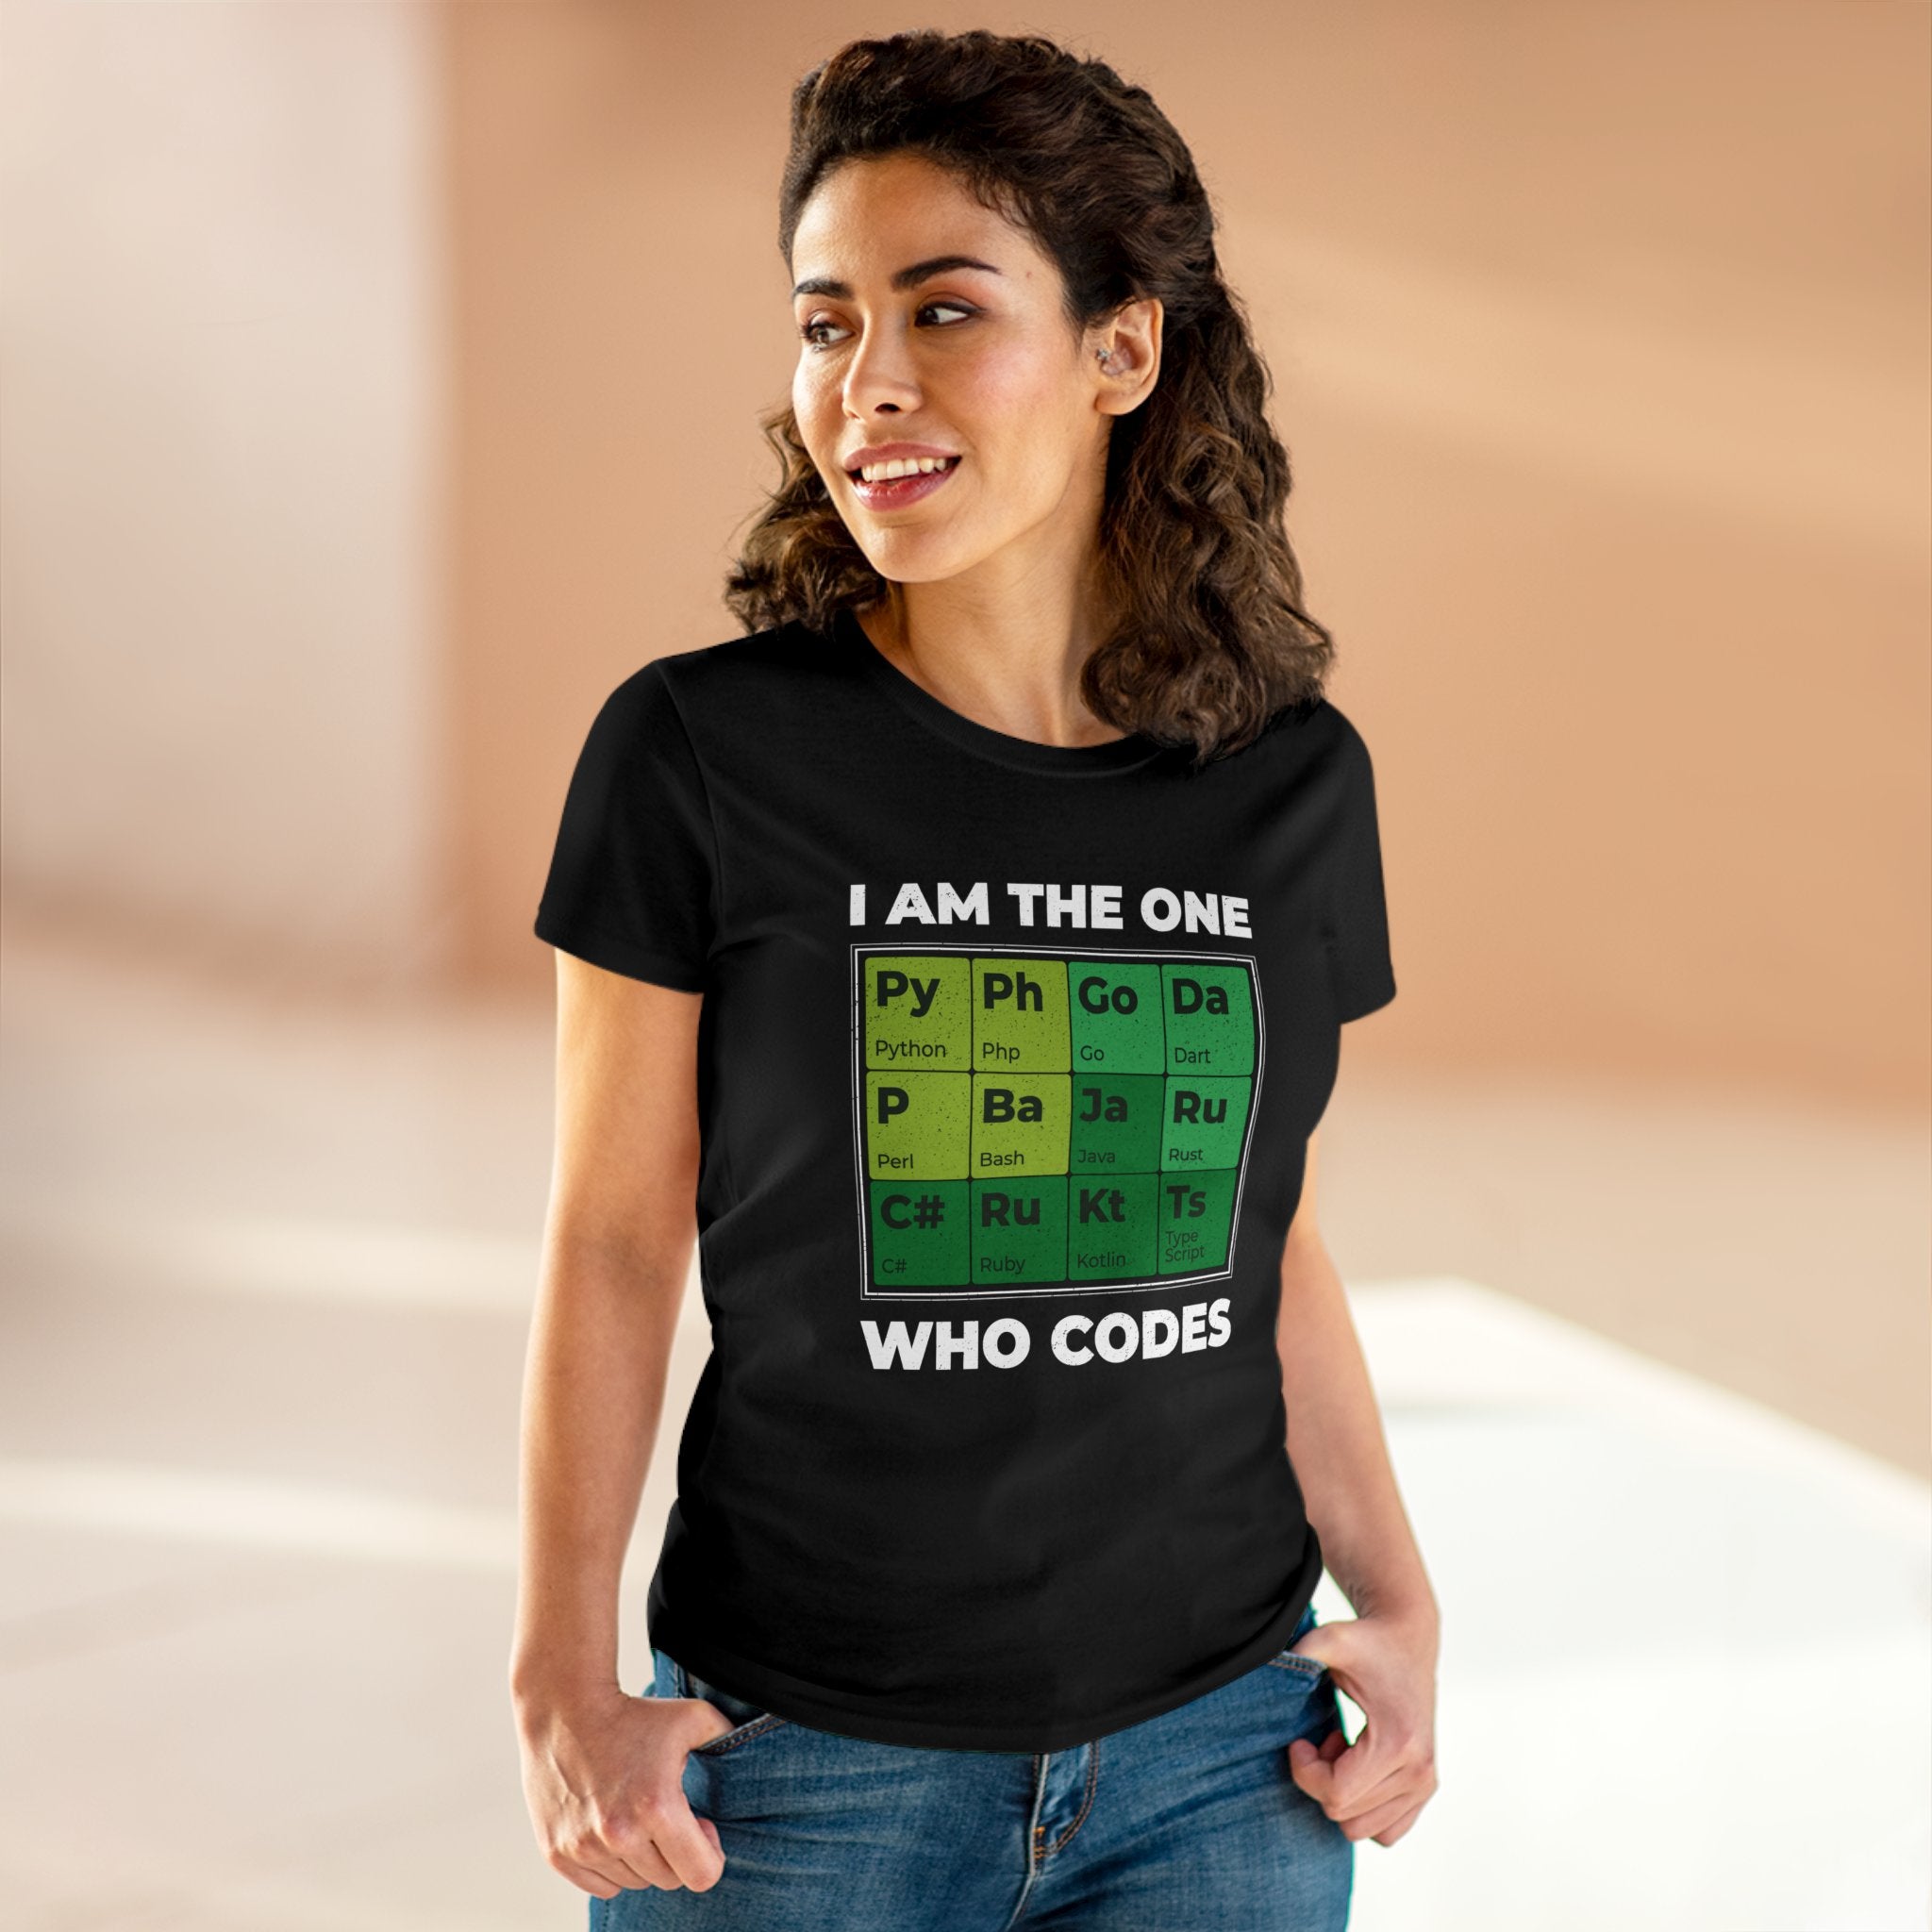 Person wearing a Developer Periodic Table - Women's Tee that exudes geek chic, featuring the text "I AM THE ONE WHO CODES" and code syntax elements displayed in a Developer Periodic Table design.